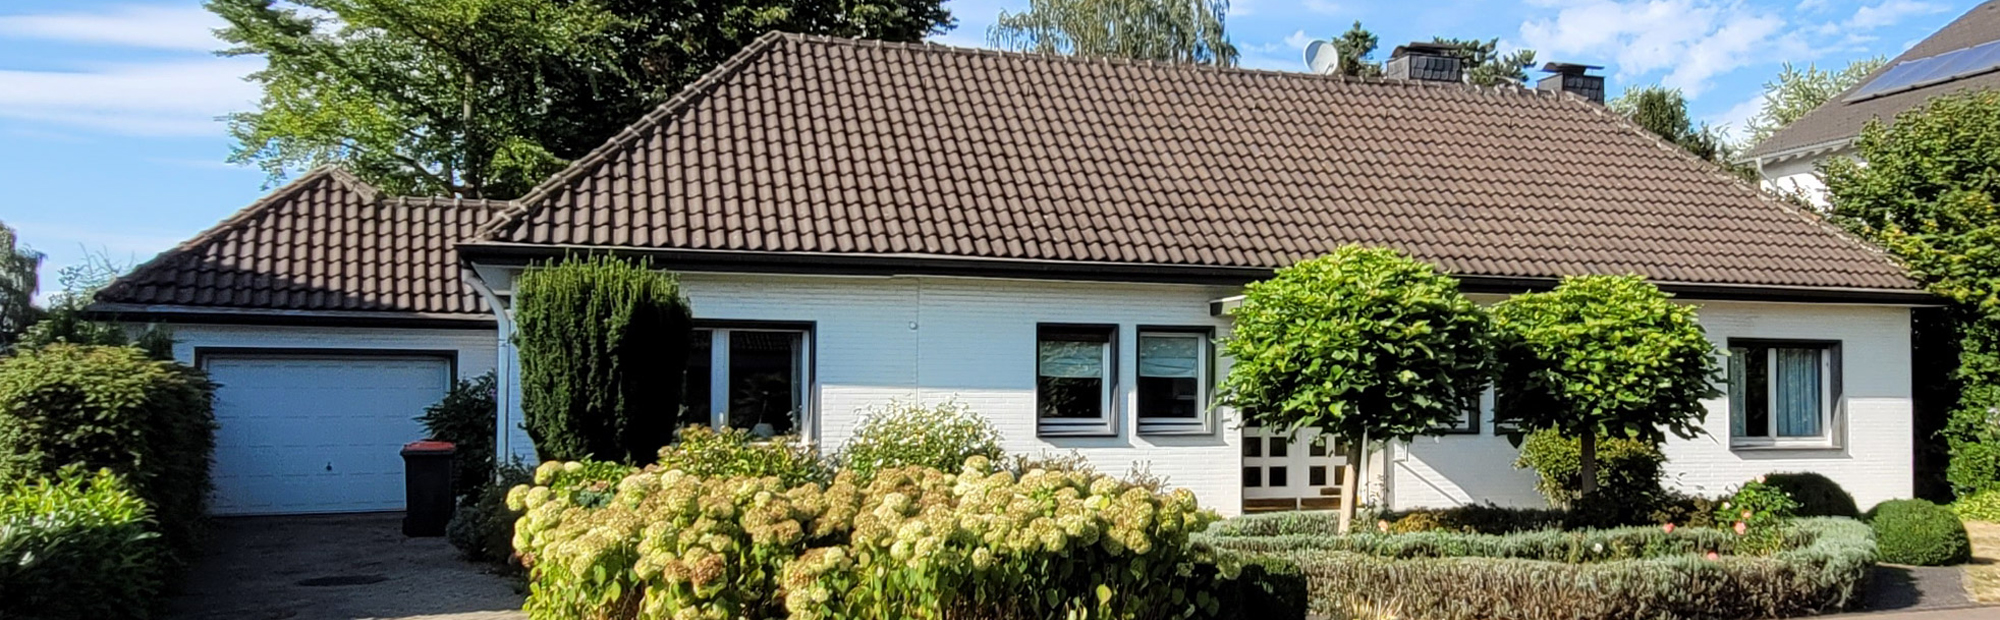 Bungalow in Dinslaken - Eppinghoven